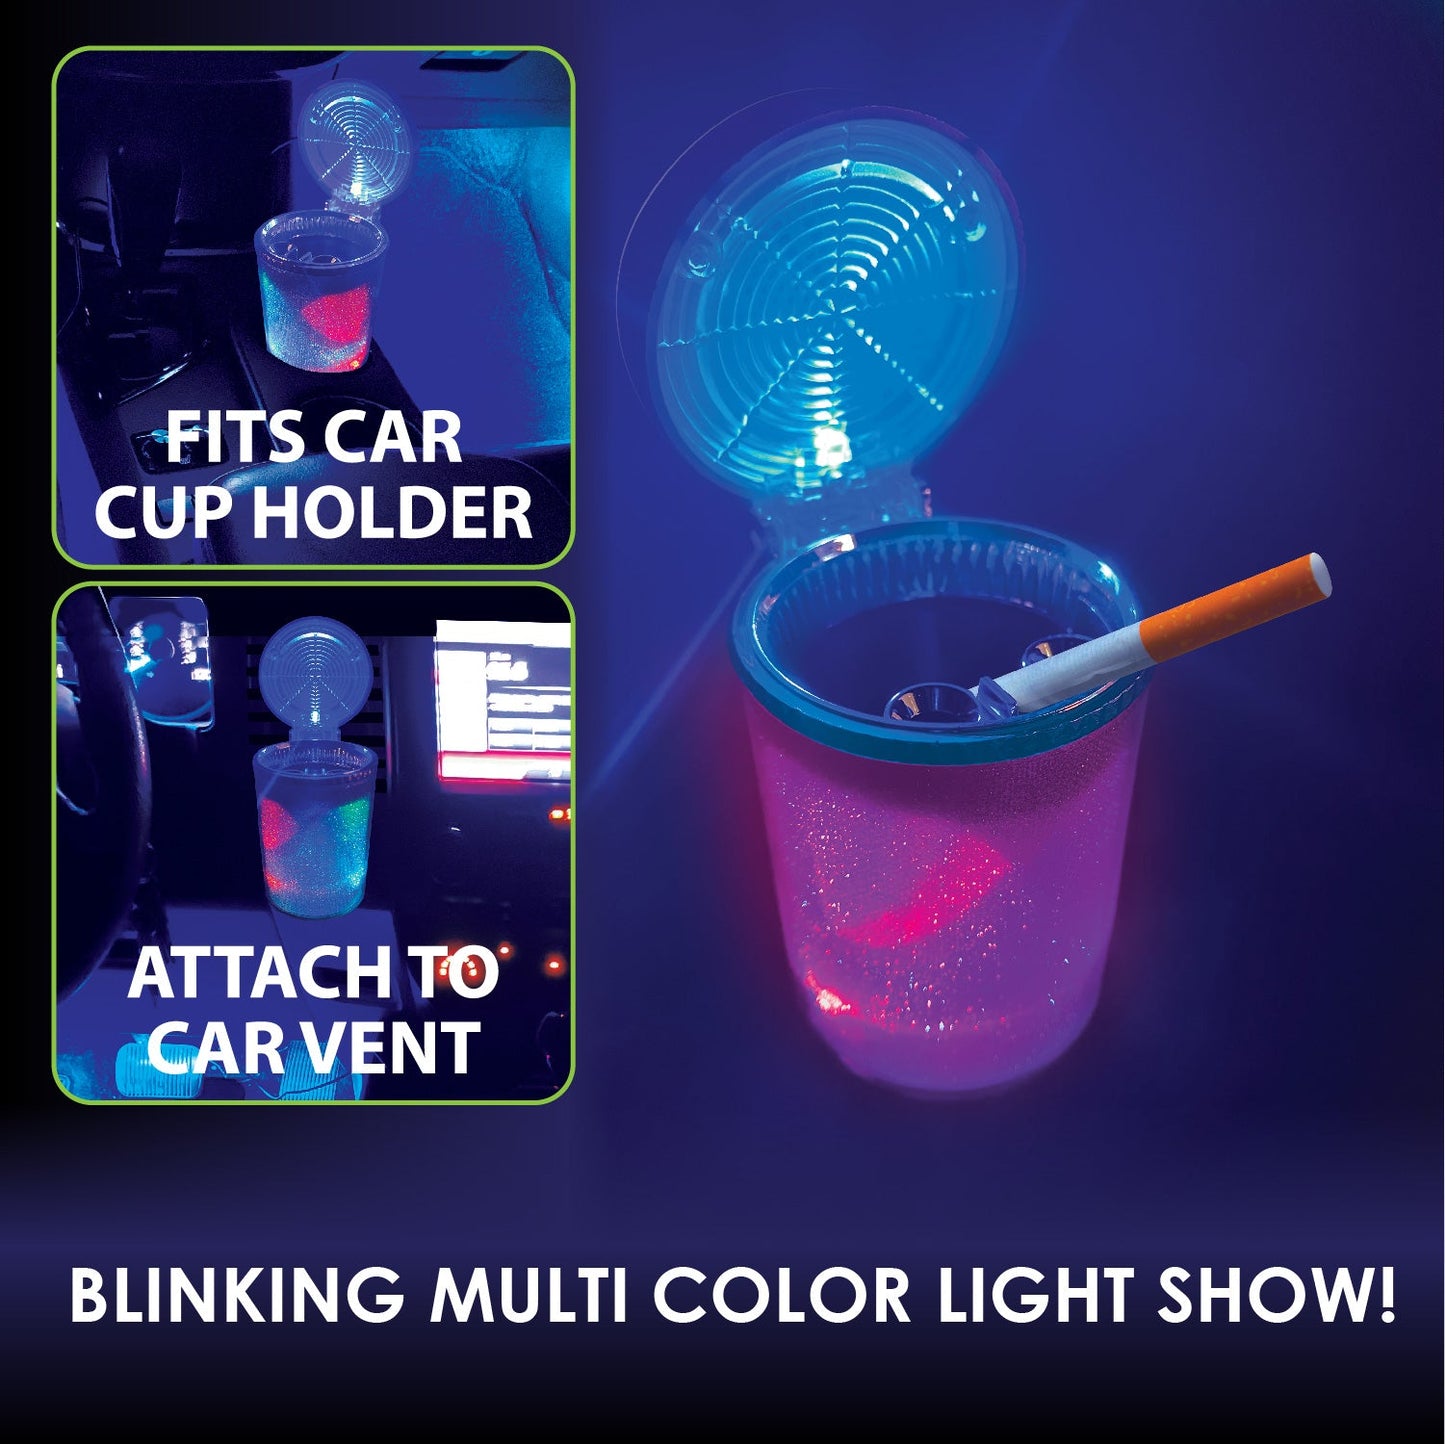 ITEM NUMBER 024111L LIGHT SHOW BUTT BUCKET - STORE SURPLUS NO DISPLAY 6 PIECES PER PACK